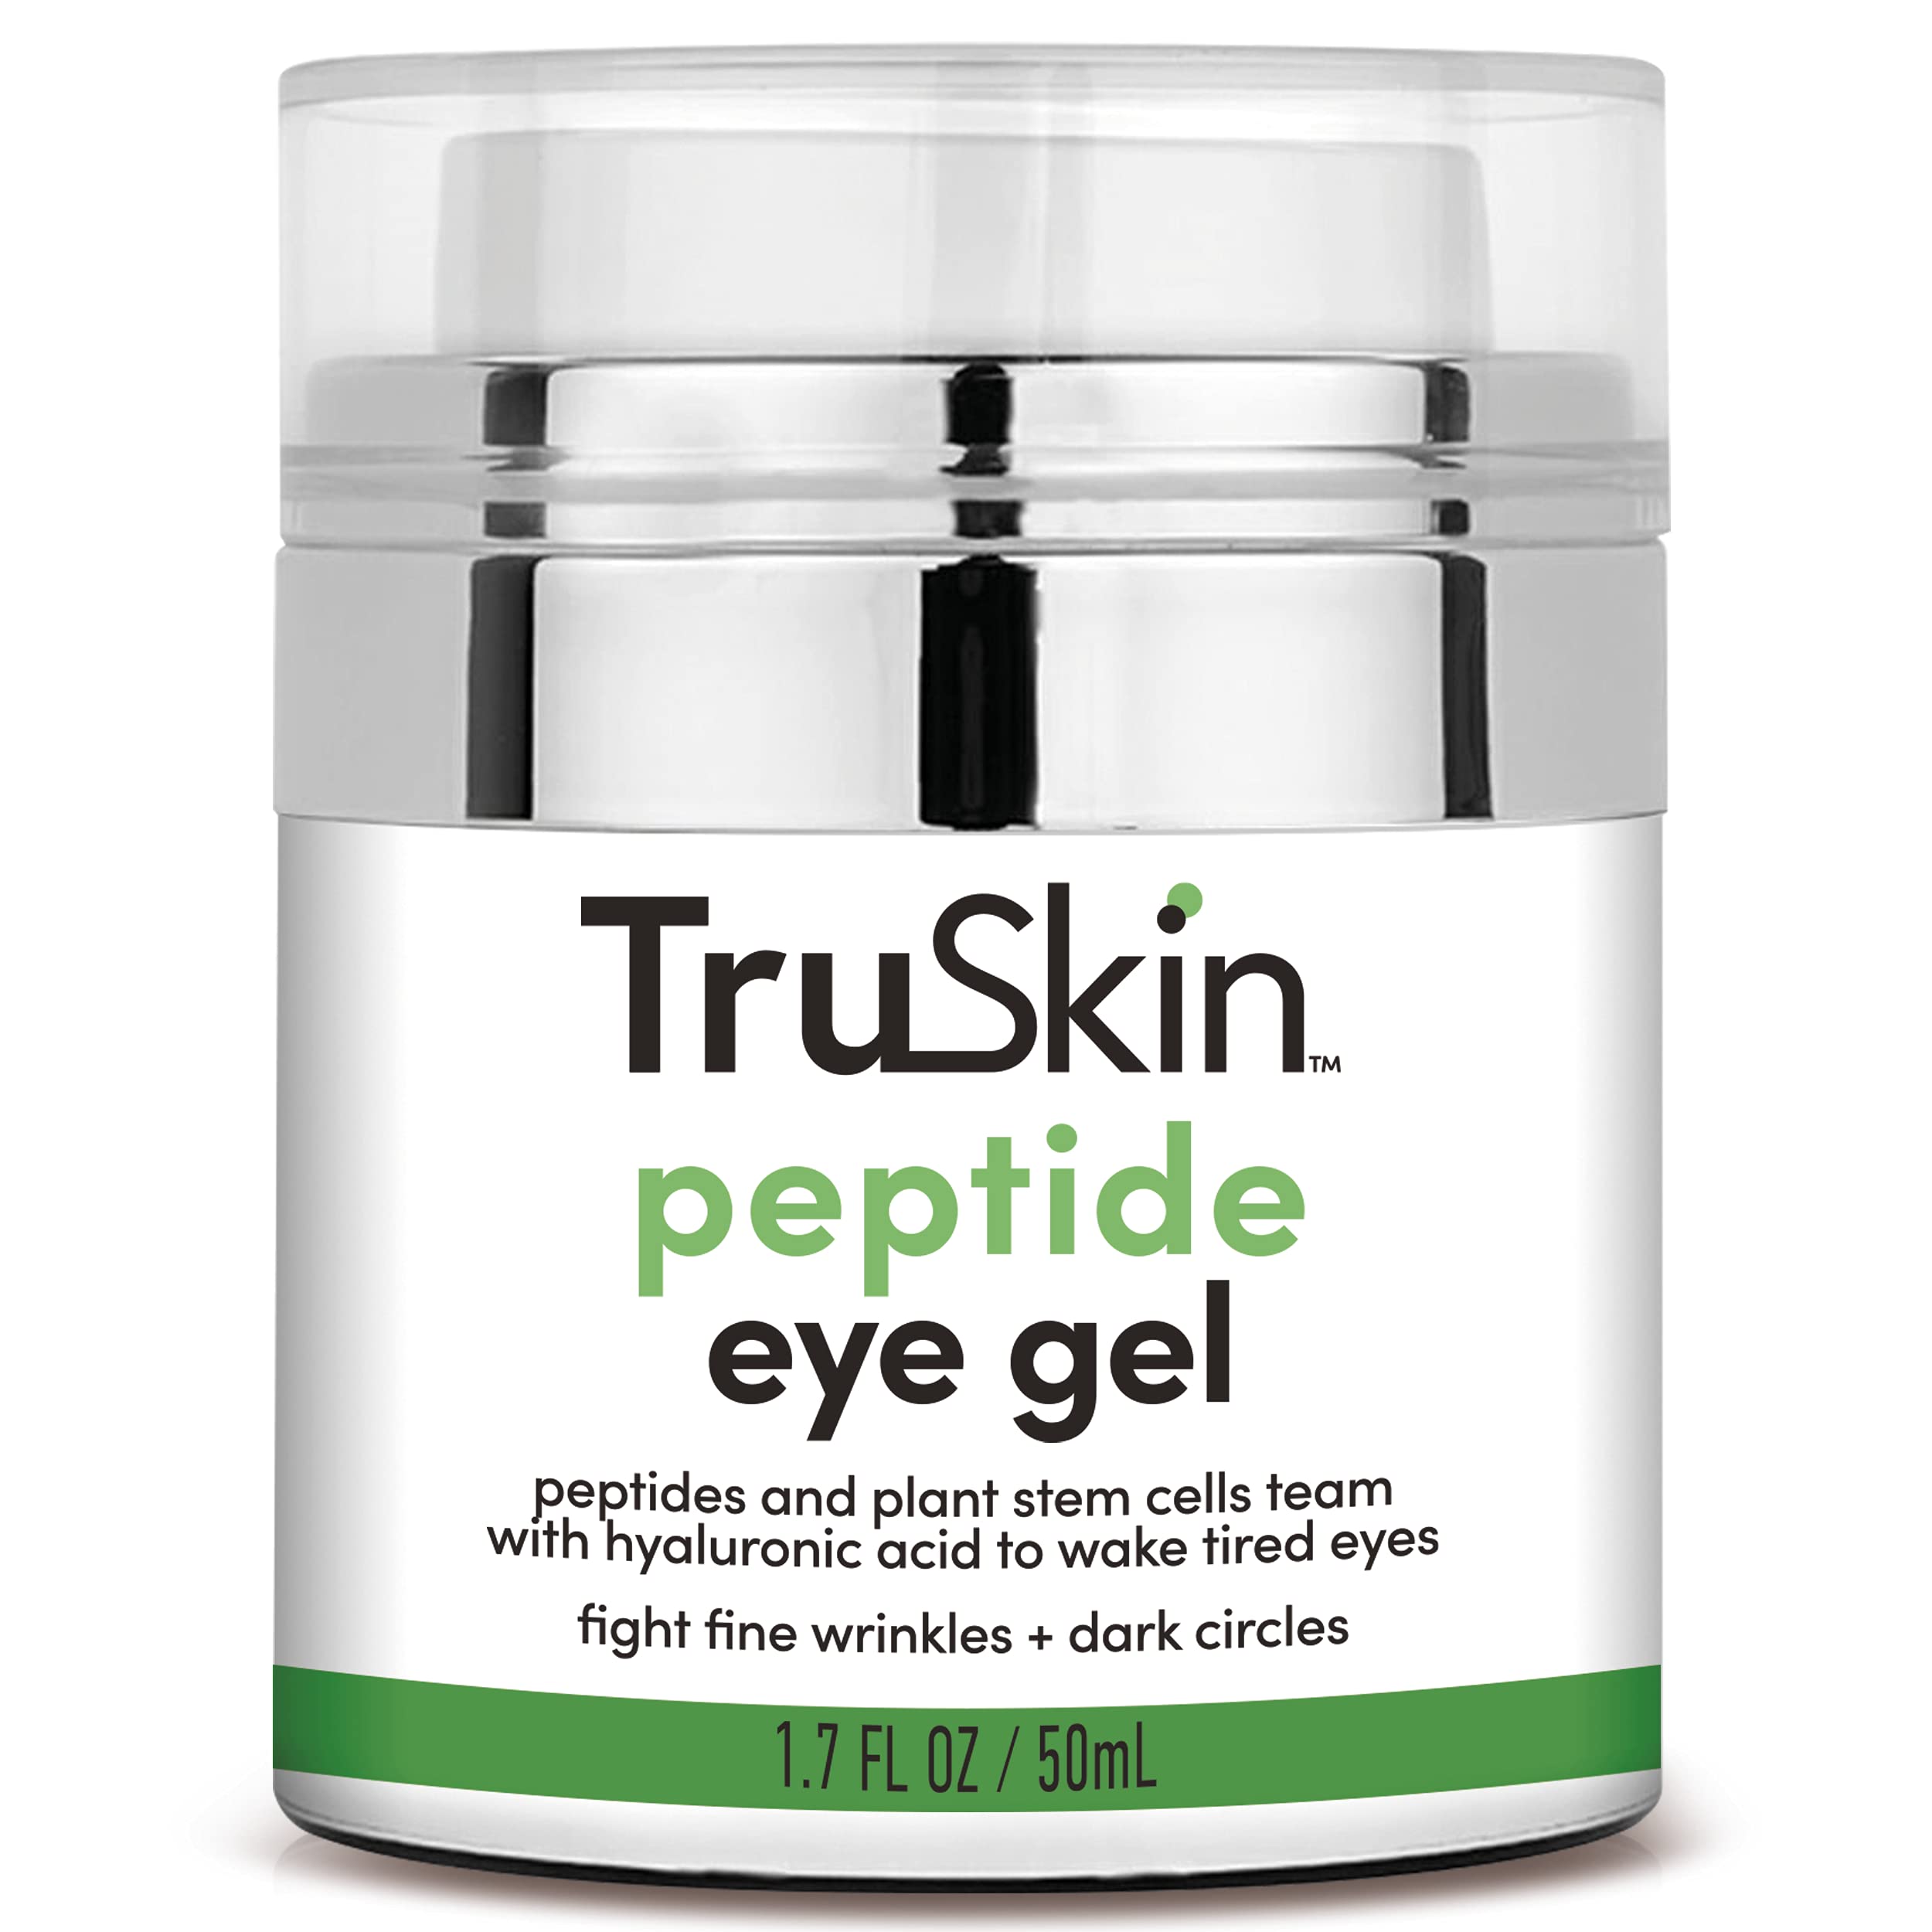 TruSkin Peptide Eye Gel – Support Collagen Production, Minimize Lines & Brighten the Eye Area – Dark Circles Under Eye Treatment for Women with Peptides, Plant Stem Cells & Hyaluronic Acid, 1.7 fl oz